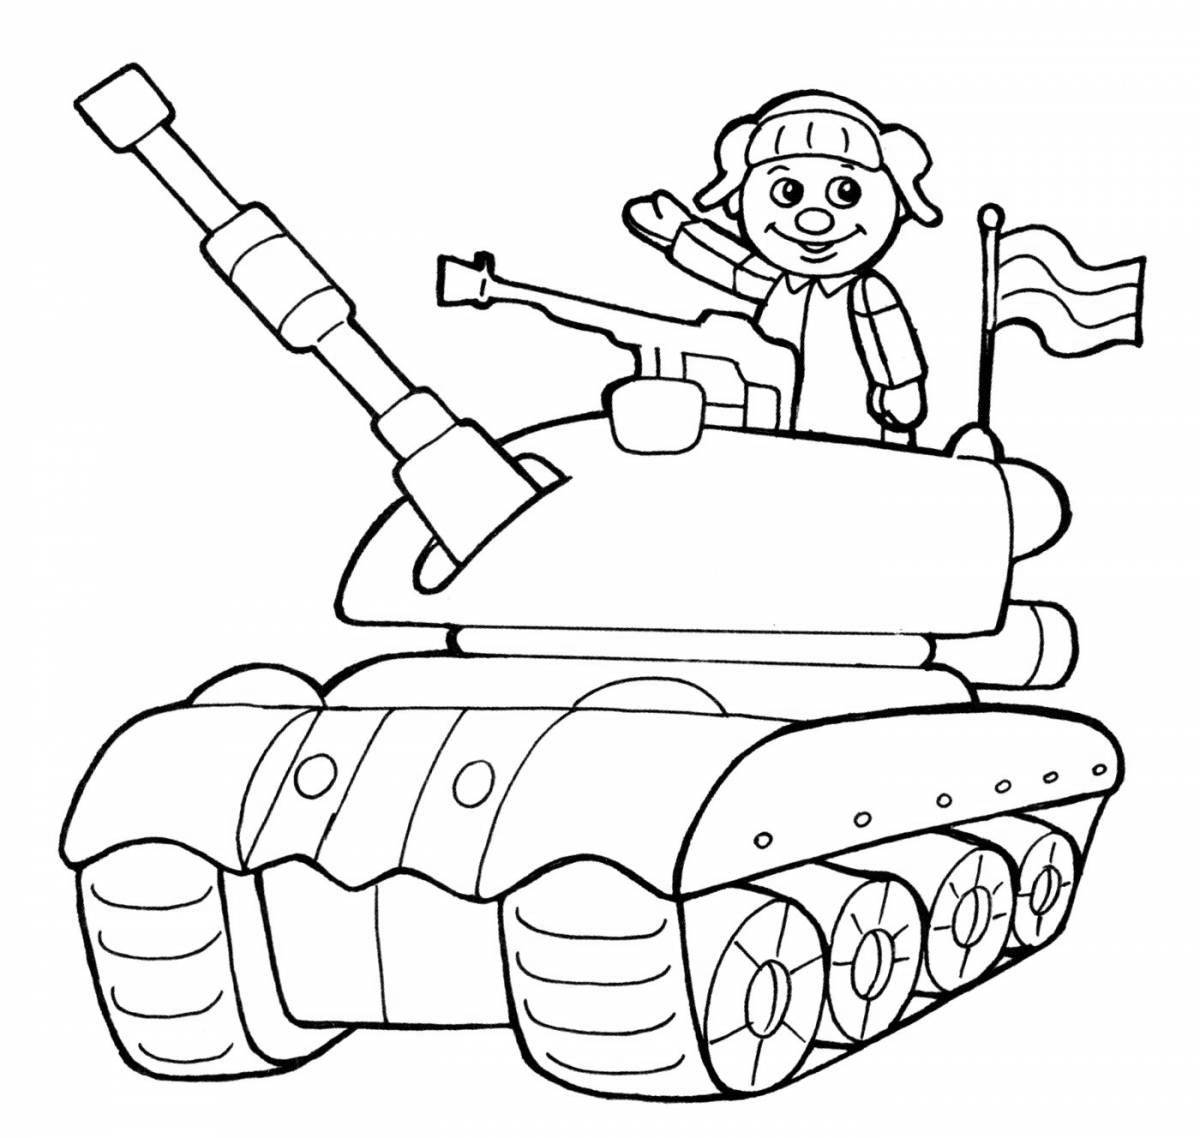 Coloring t34 tank for kids